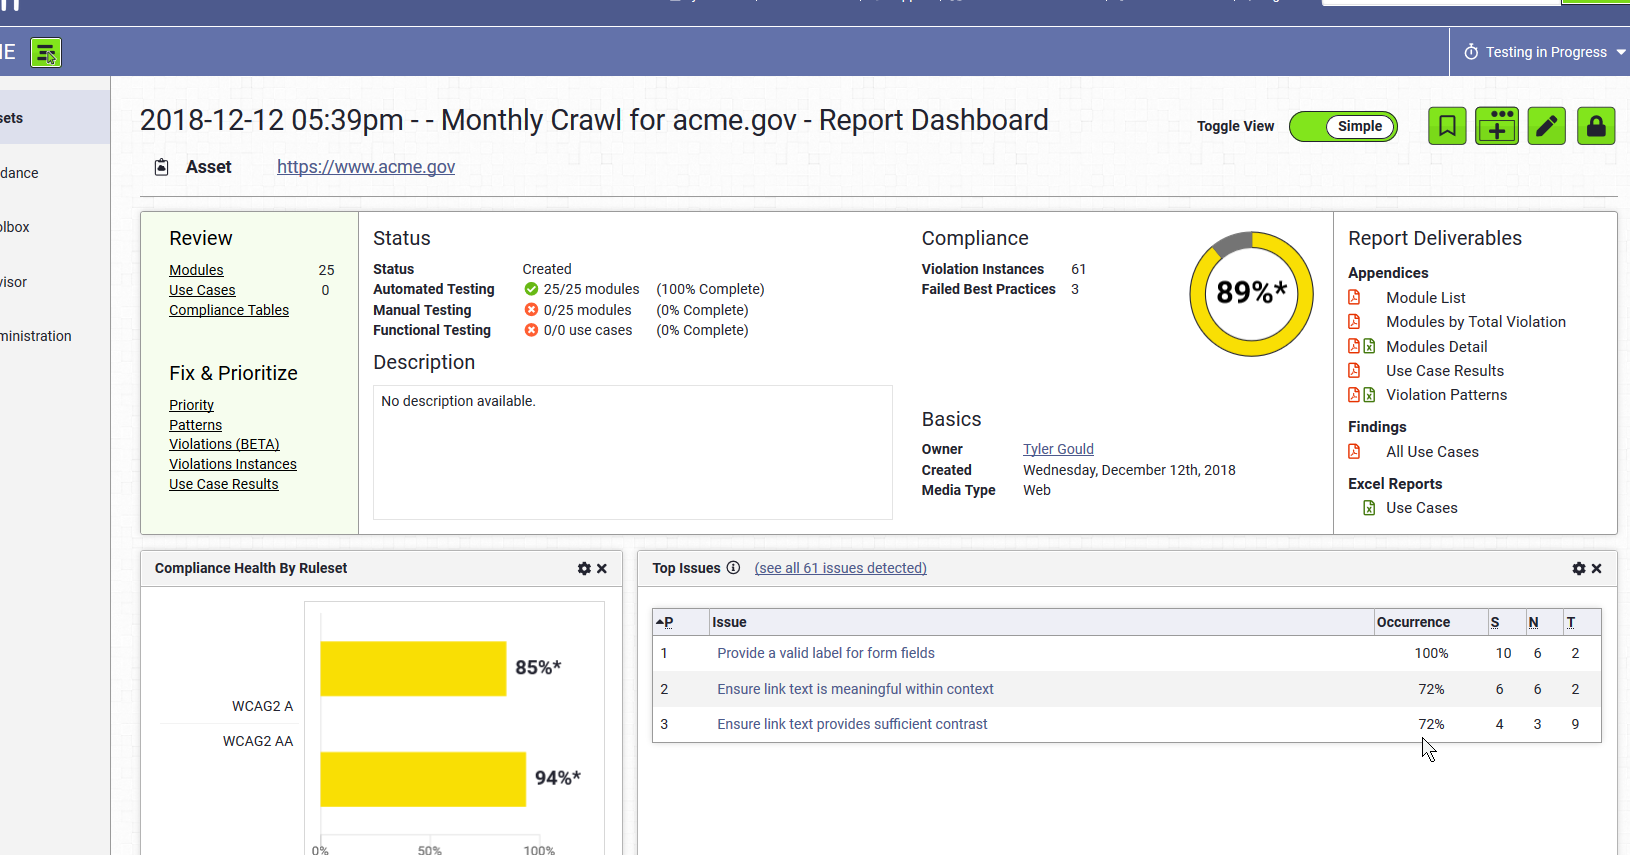 Simplified report dashboard.